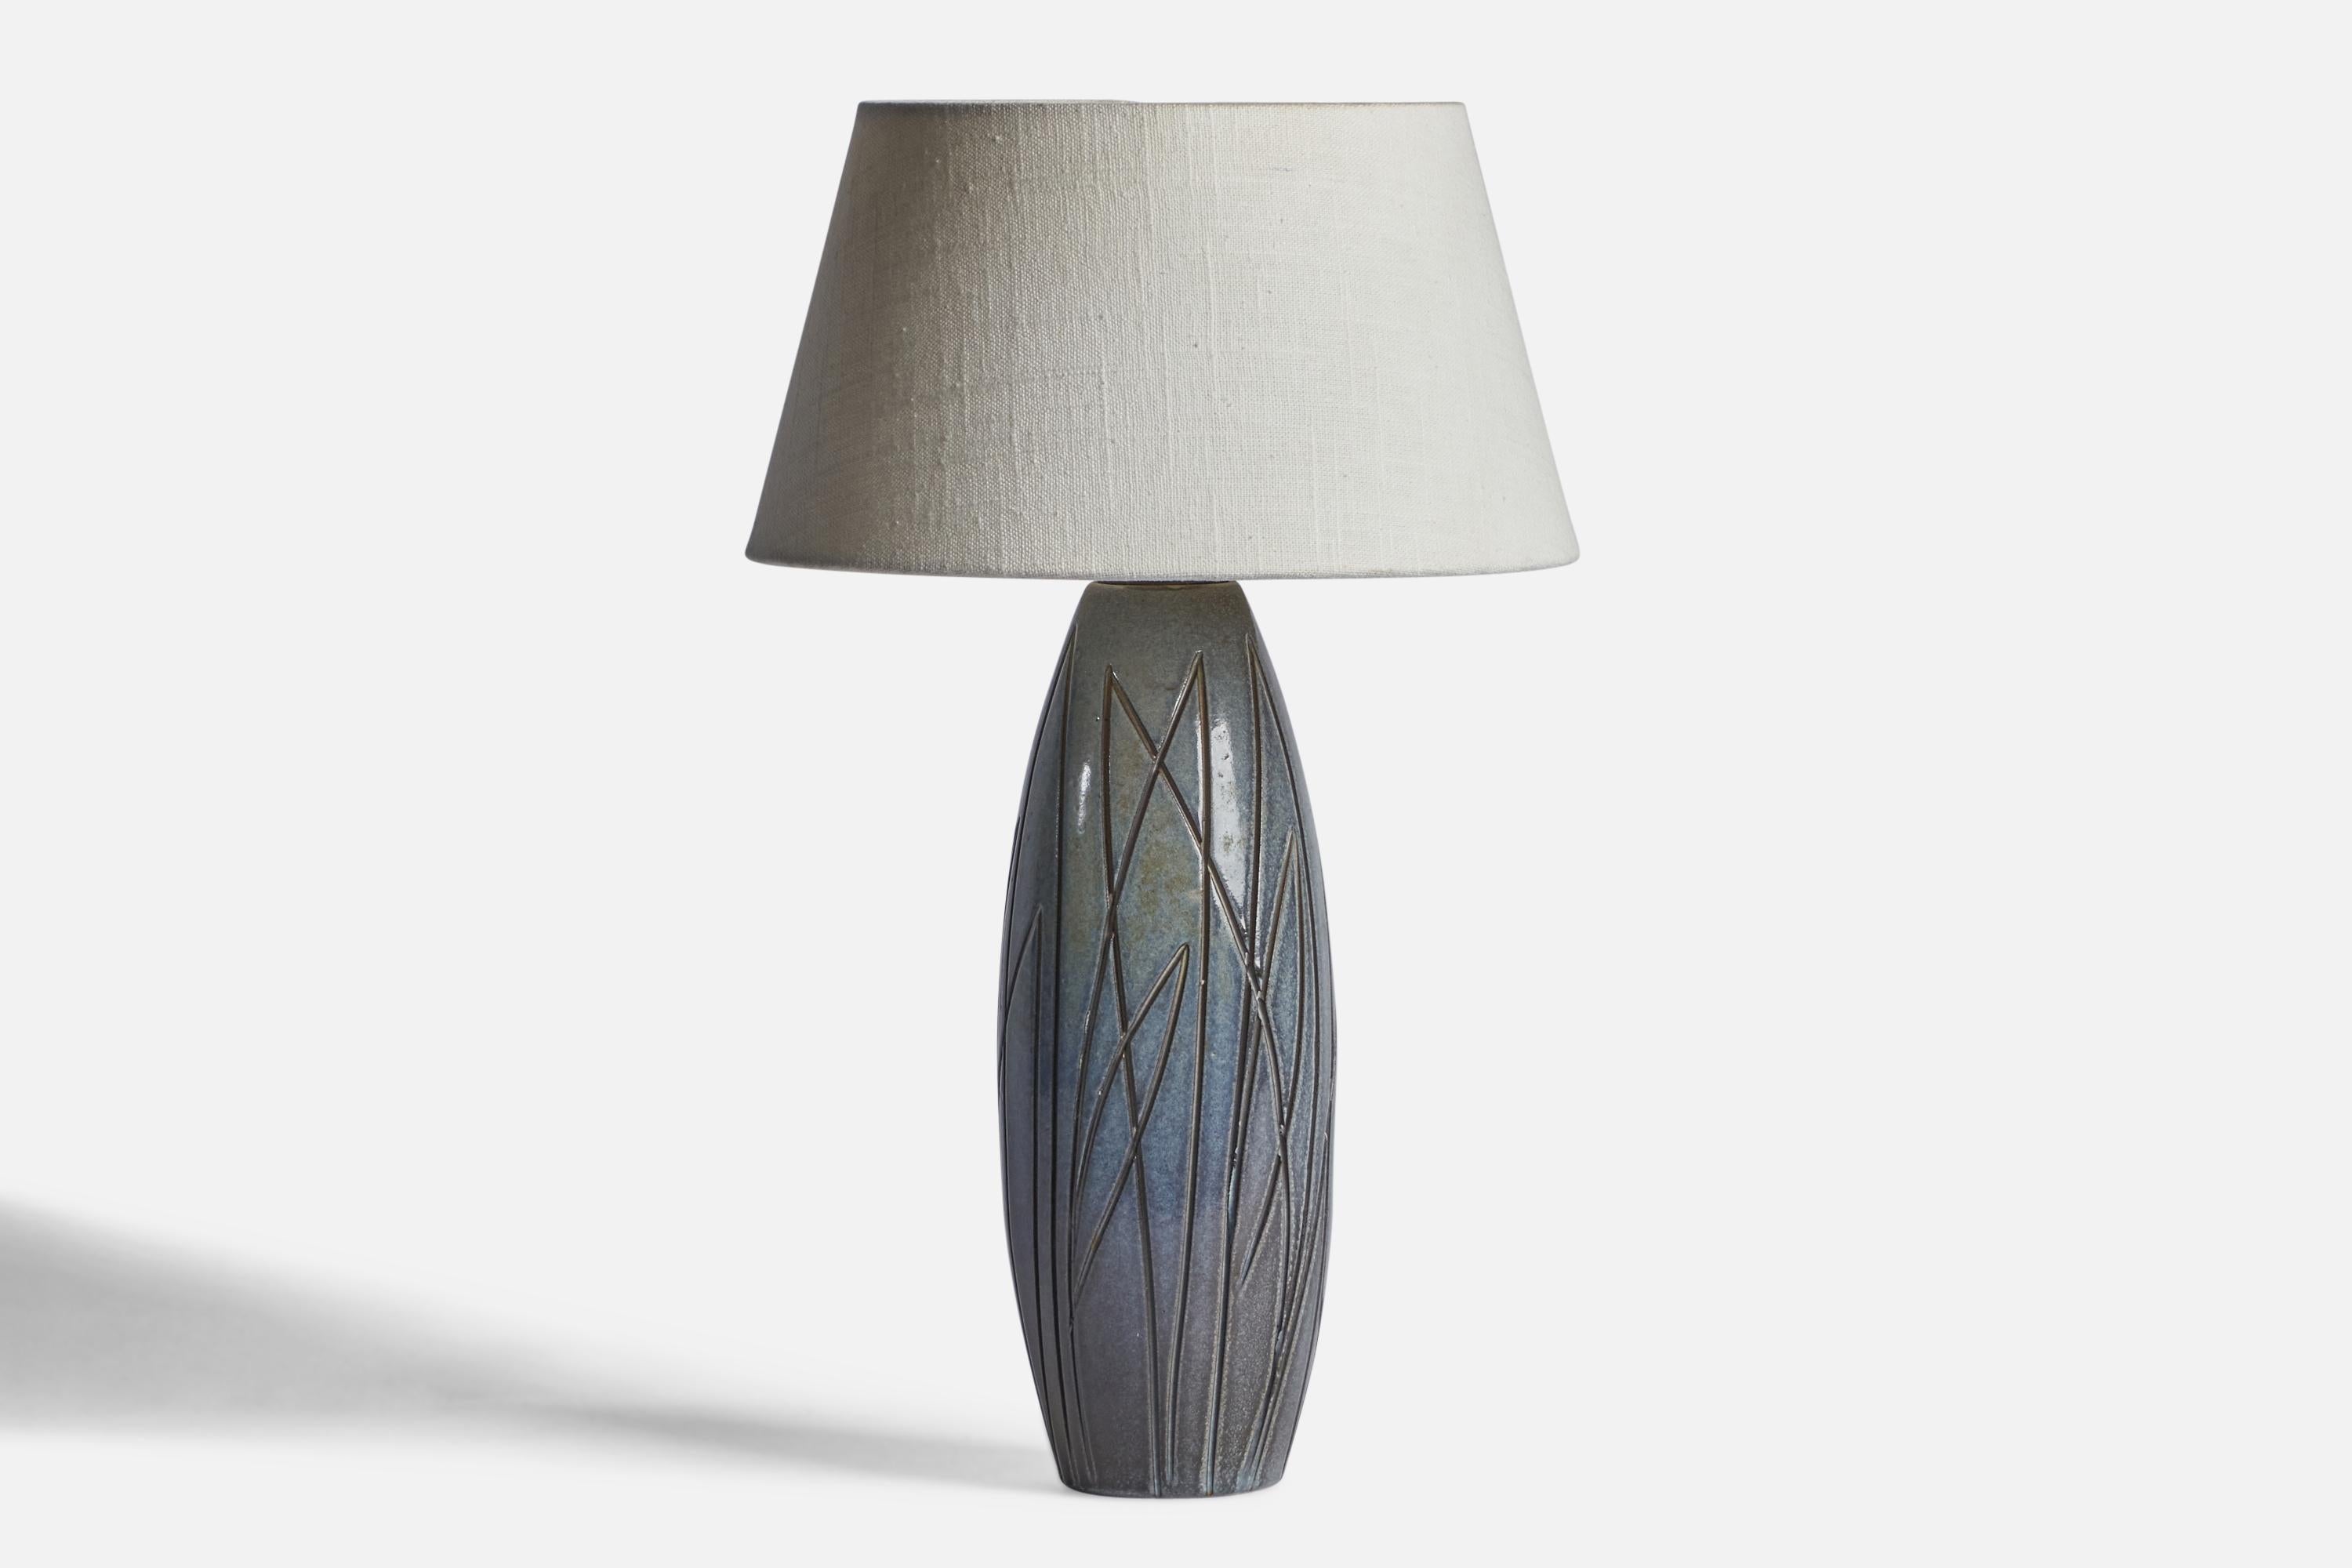 A blue-glazed incised table lamp designed by Ingrid Atterberg and produced by Upsala Ekeby, Sweden, 1950s.

Dimensions of Lamp (inches): 13.5” H x 4.1” Diameter
Dimensions of Shade (inches): 7” Top Diameter x 10” Bottom Diameter x 5.5” H 
Dimensions